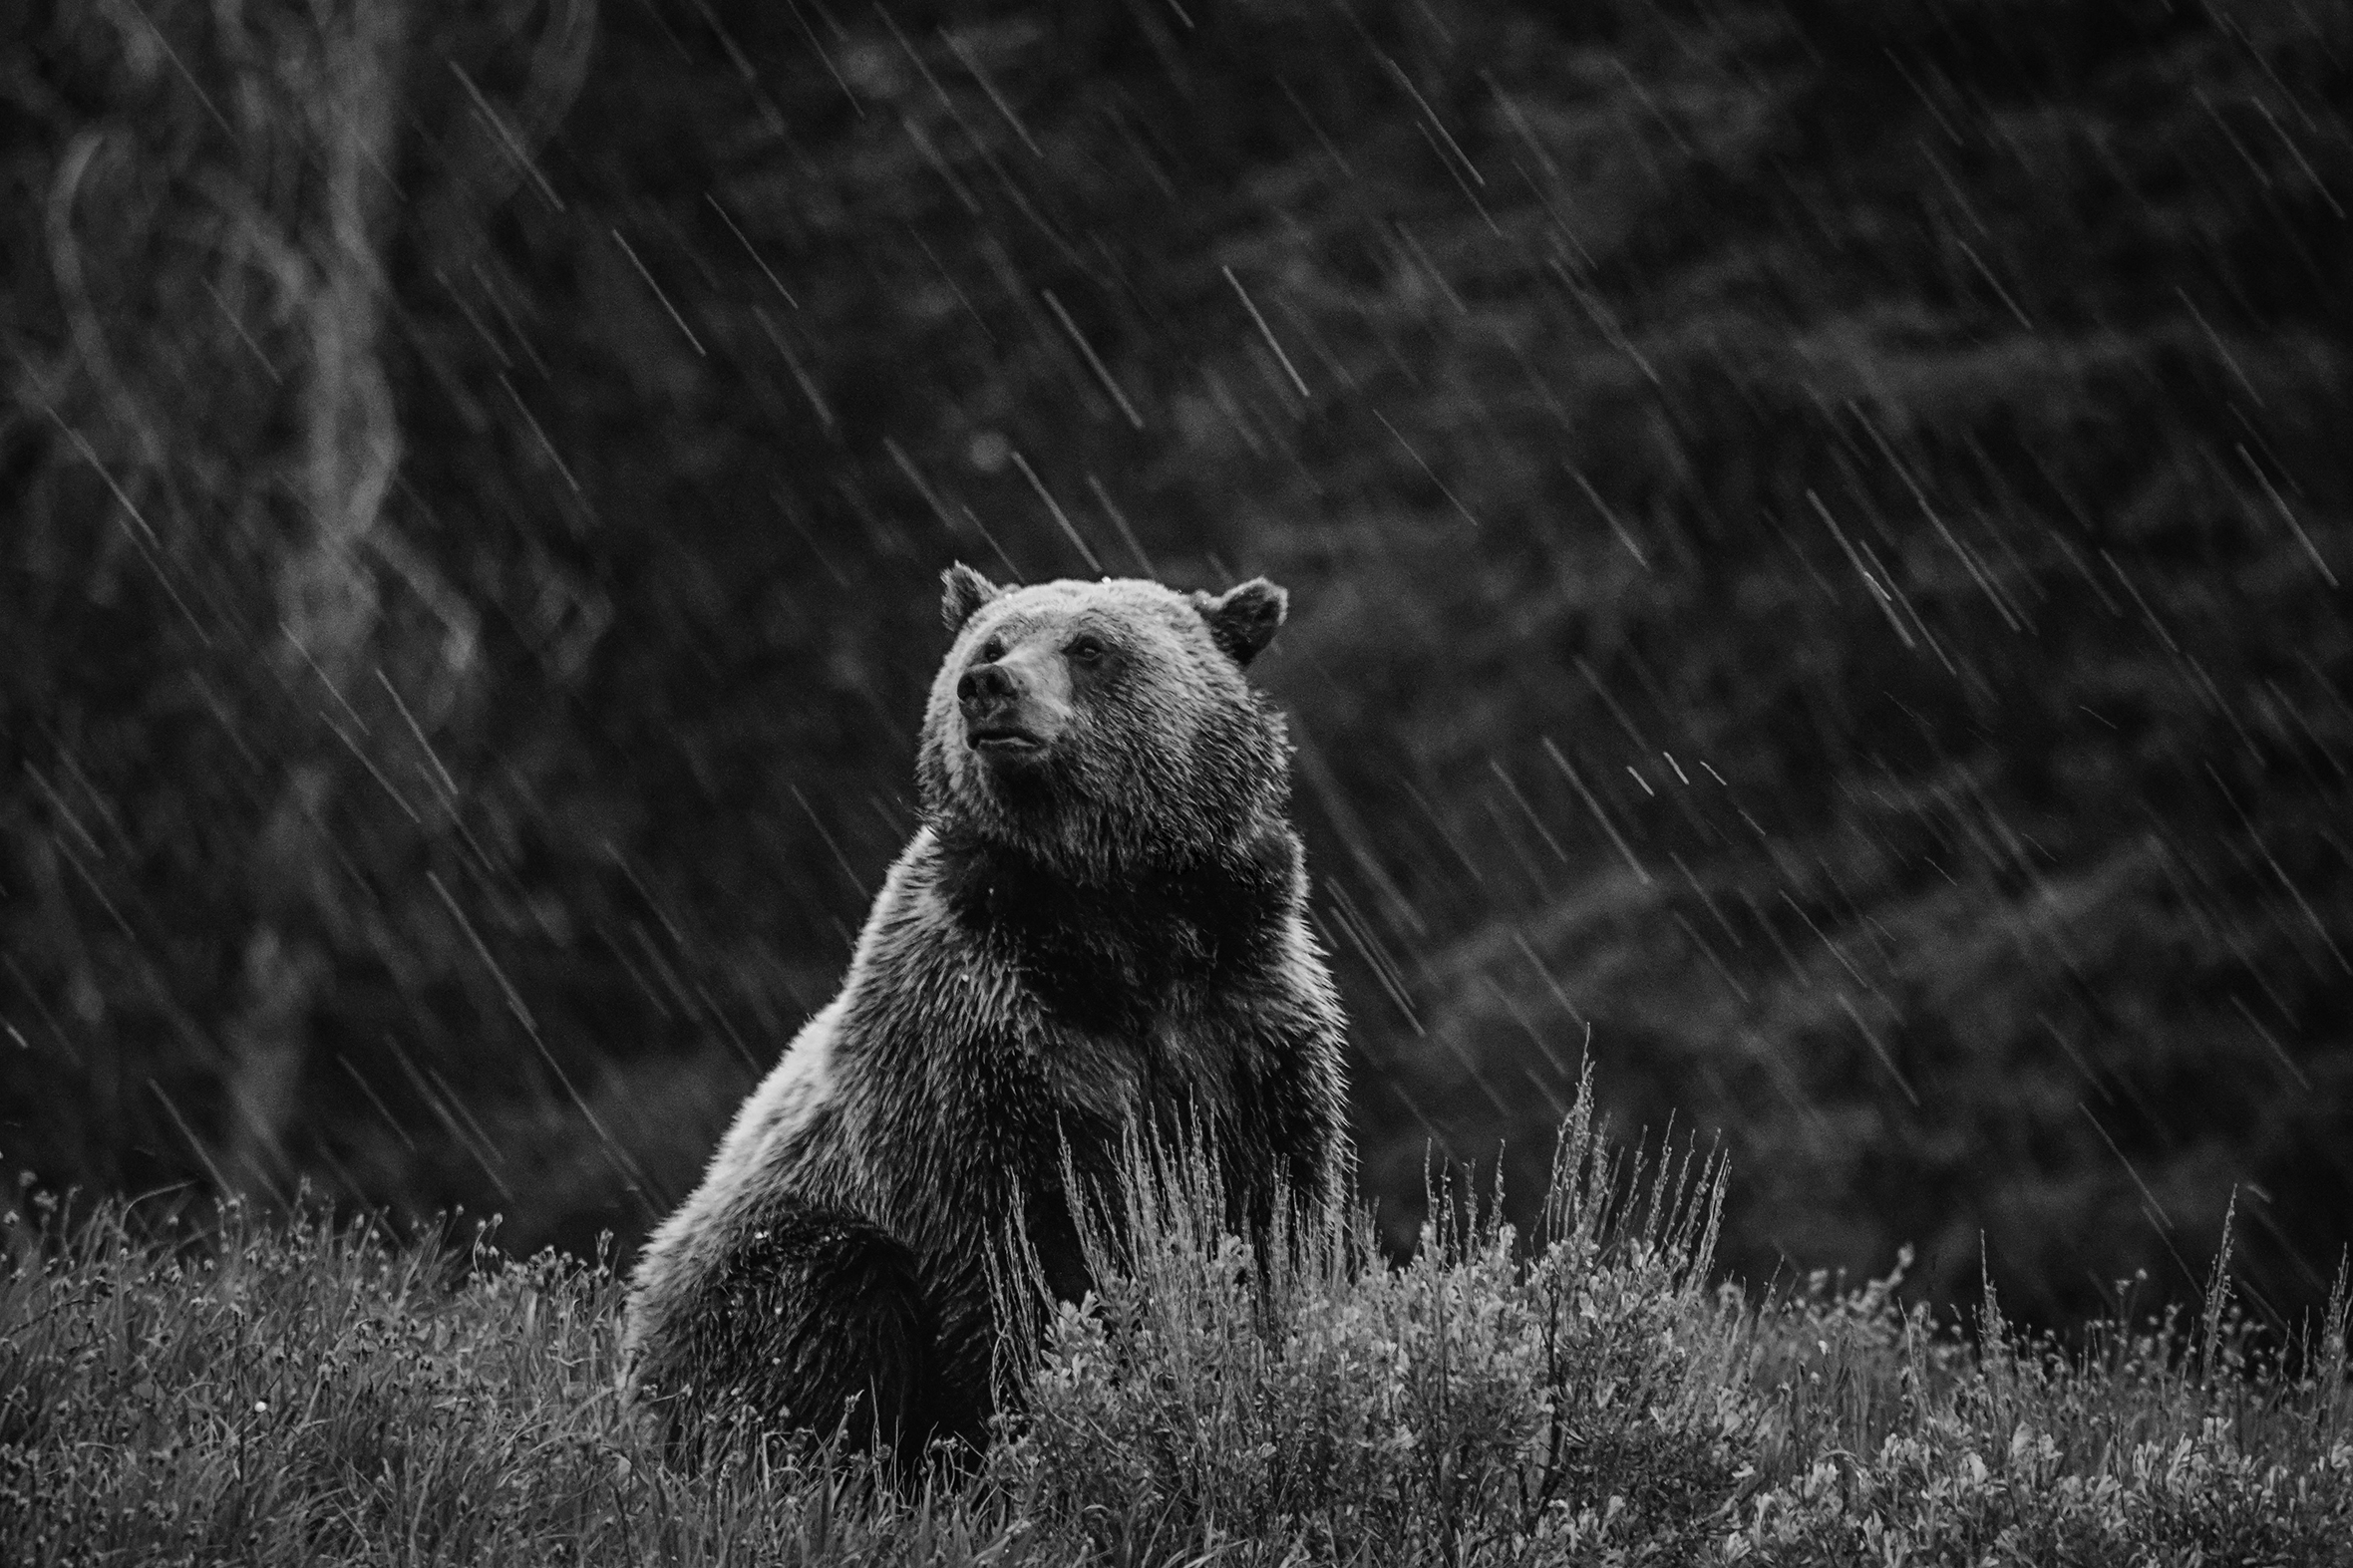 A grizzly bear sits up amid rain and hail on the east side of the Grand Tetons in Wyoming.